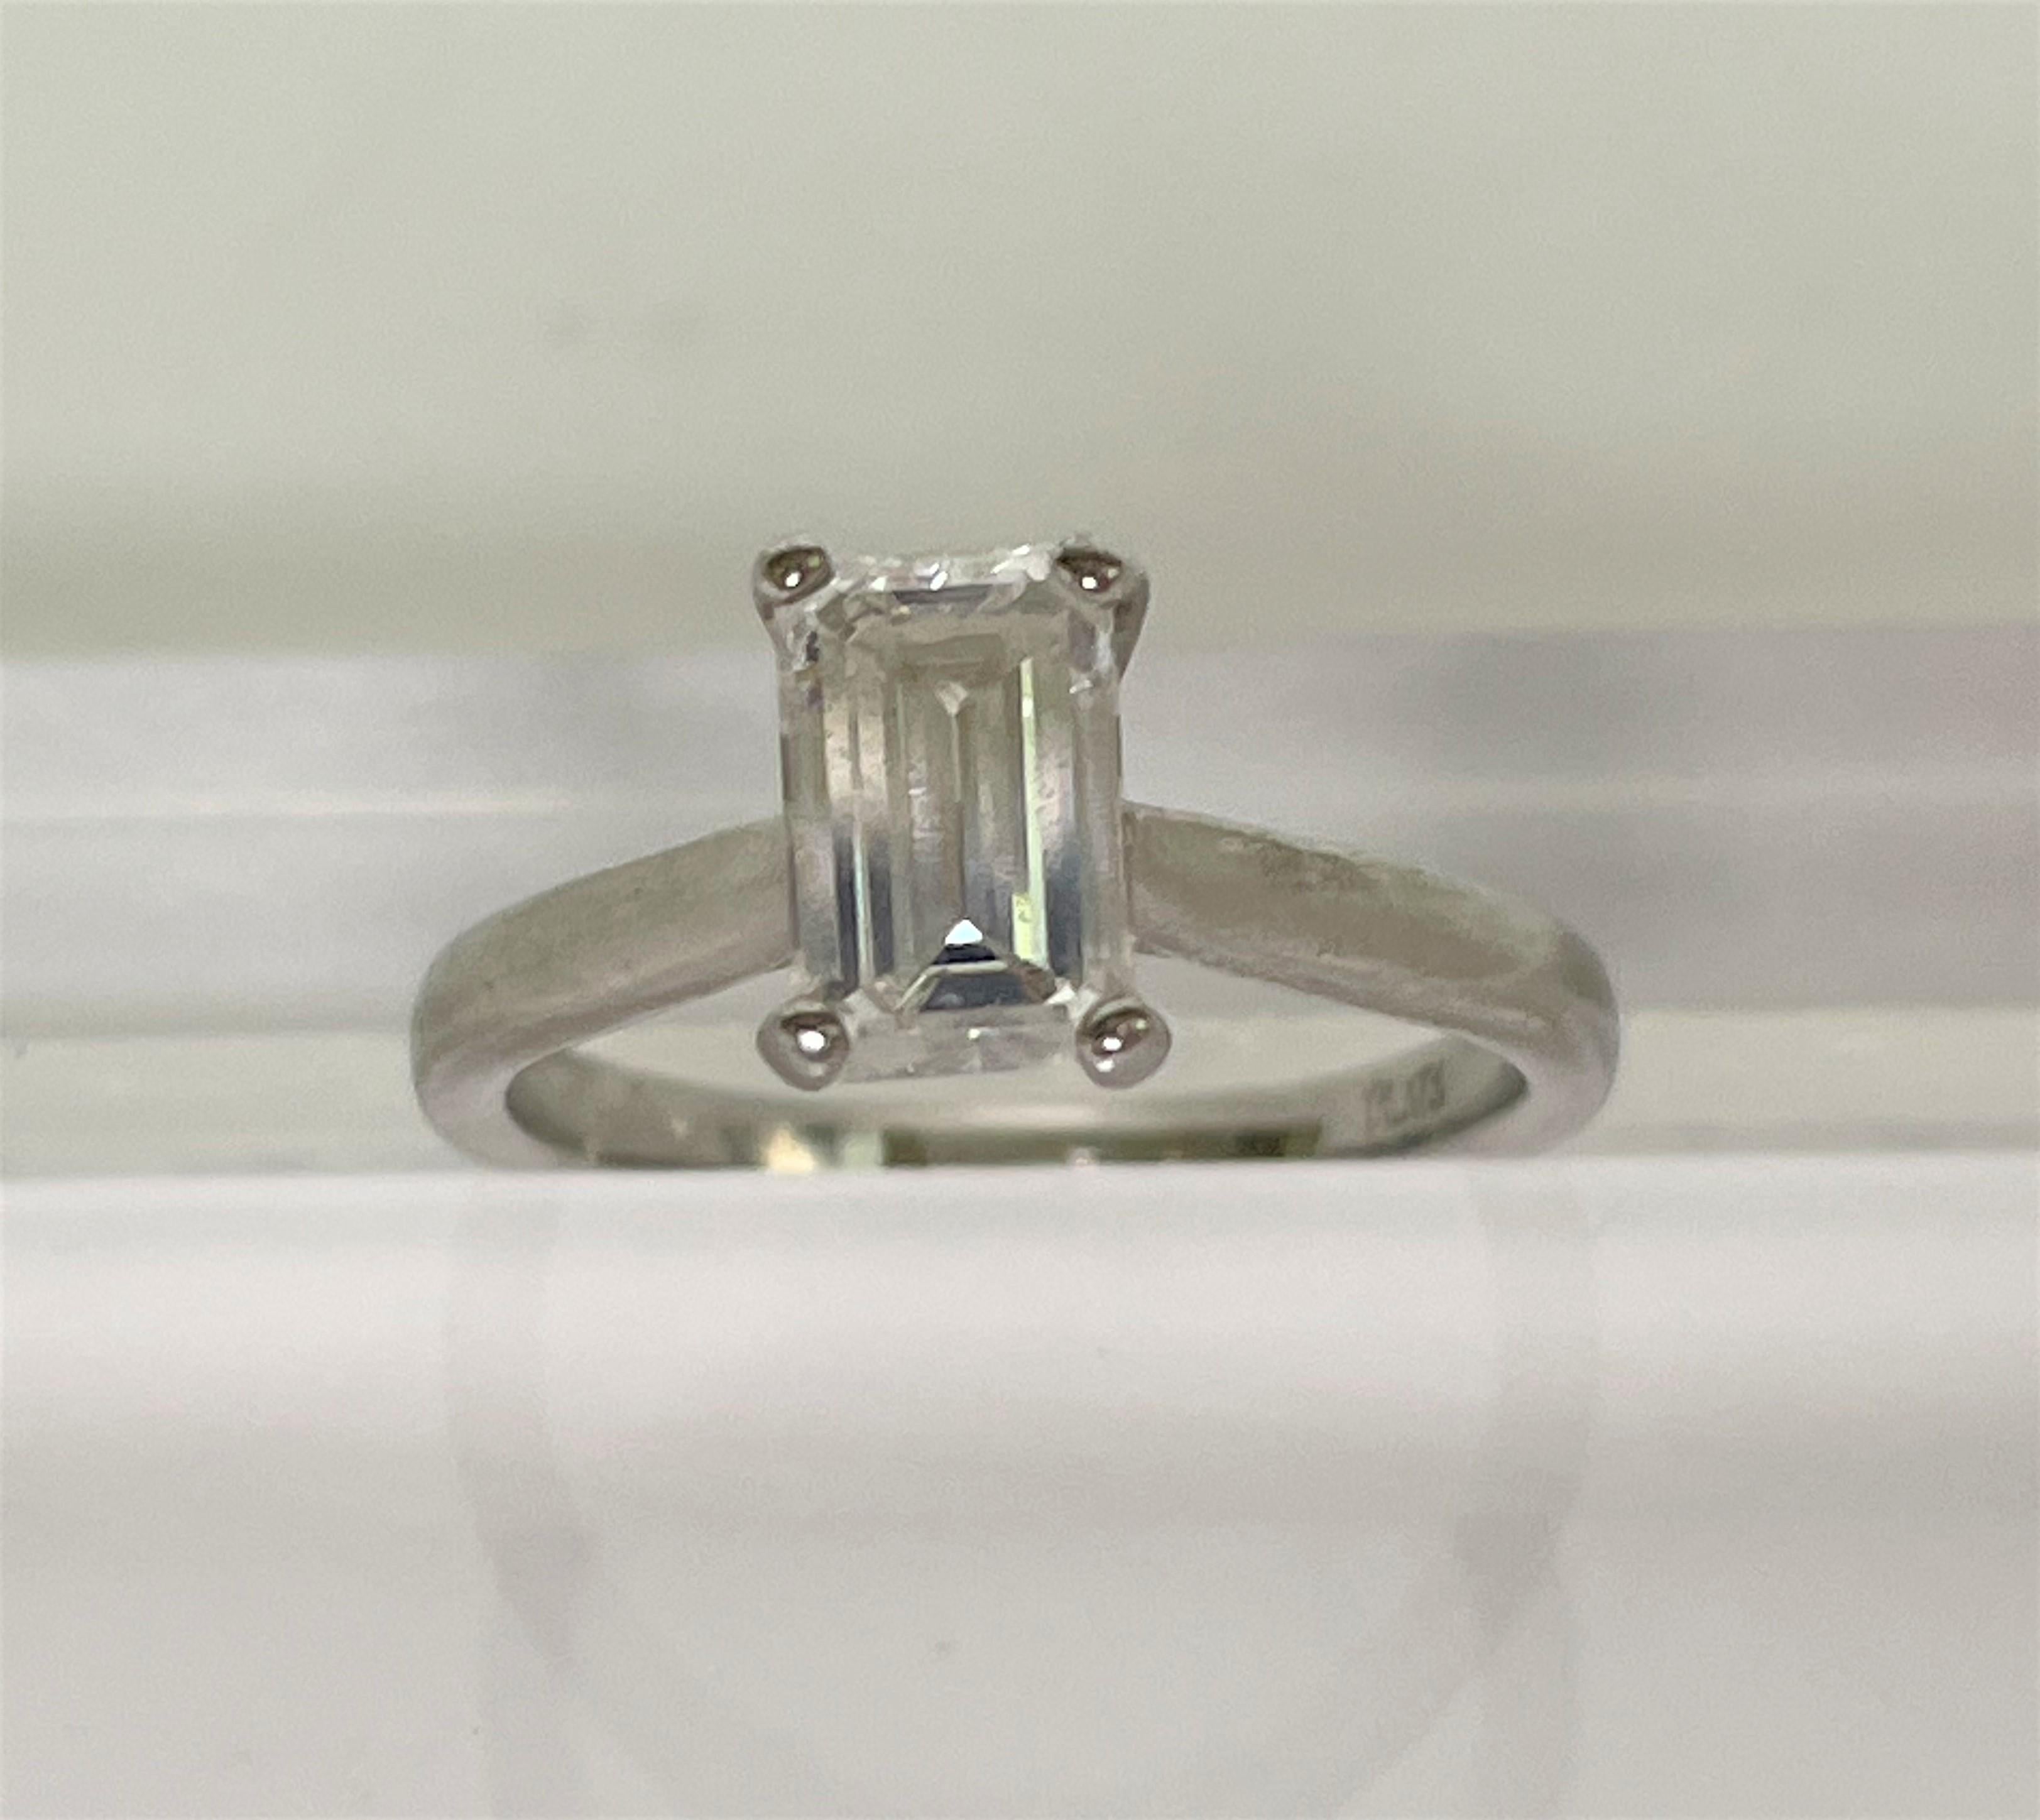 Beautifully simple!  This ring shines from across the room!
Platinum band with four prongs, approximately 2.0-2.5mm wide
Approximately 1 carat emerald cut diamond, approximately 7.55mm X 4.72mm X 3.6mm.   
H-I color, SI clarity
Size 5
Stamped 